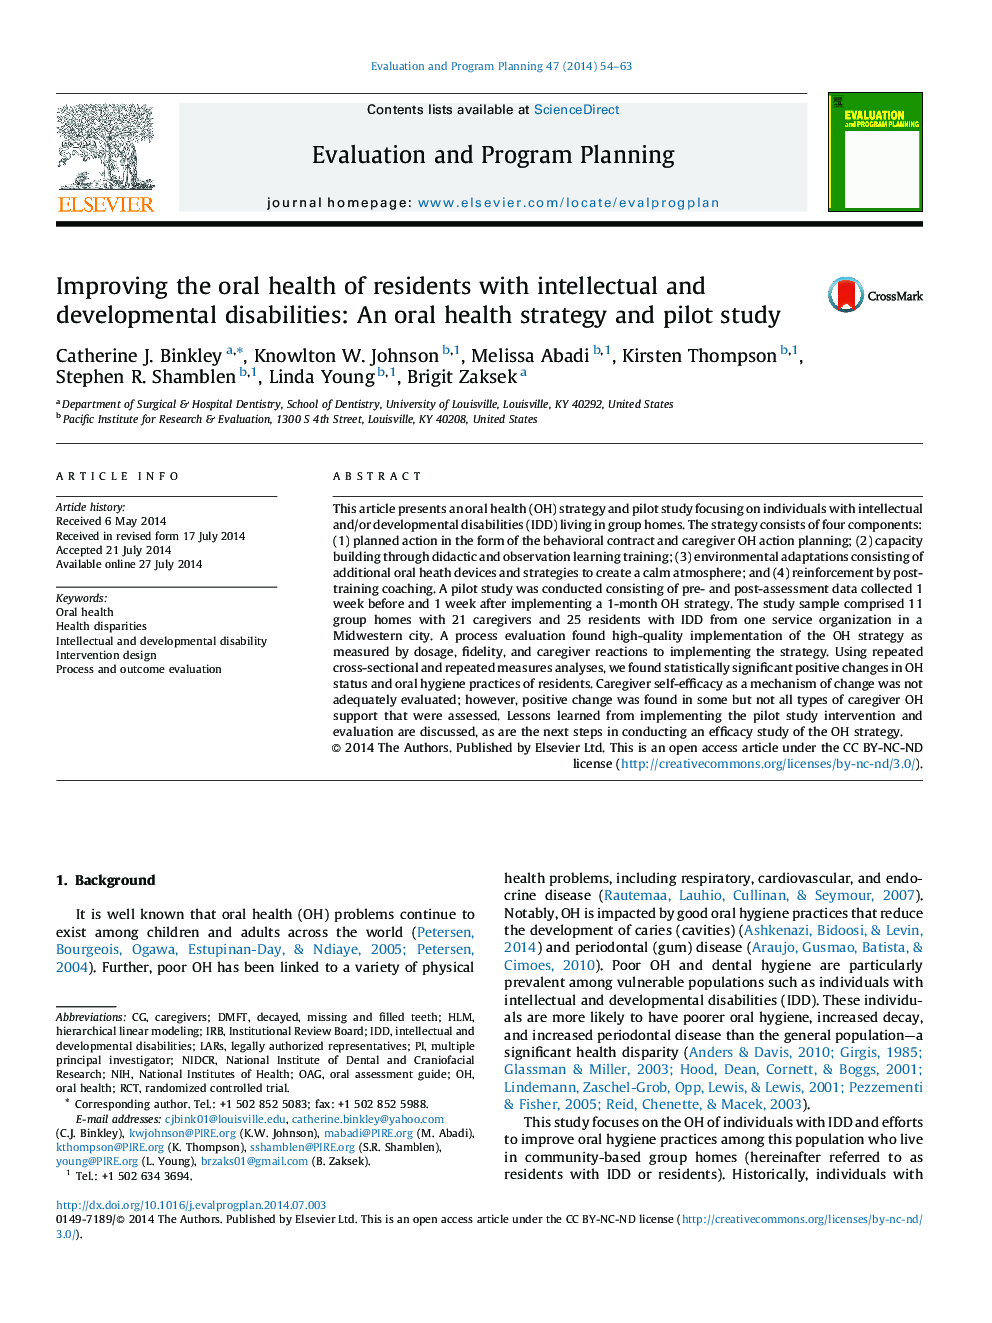 Improving the oral health of residents with intellectual and developmental disabilities: An oral health strategy and pilot study